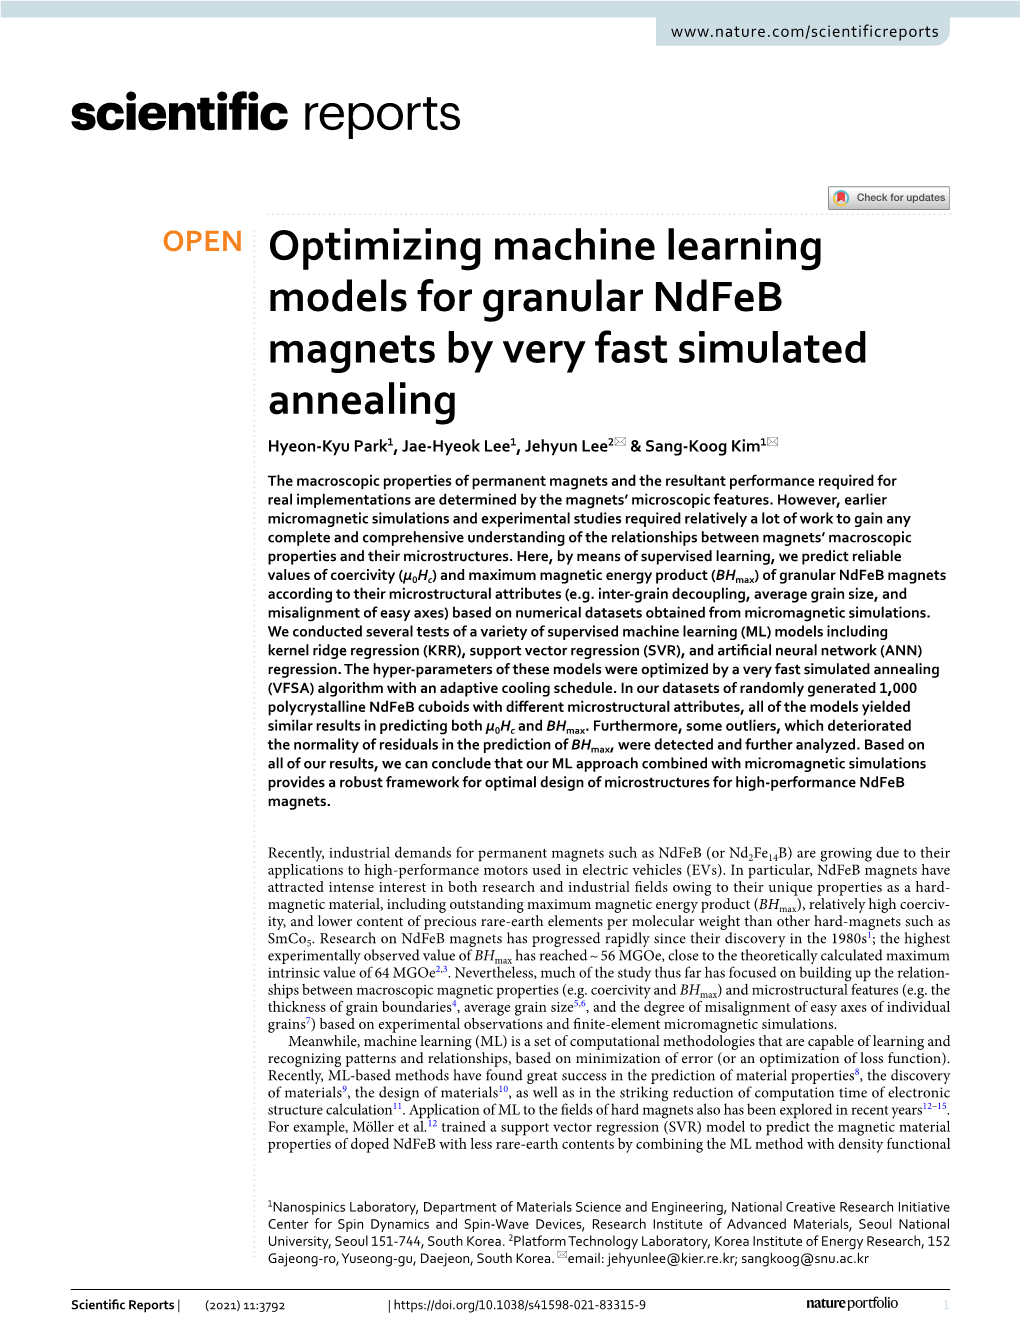 Optimizing Machine Learning Models for Granular Ndfeb Magnets by Very Fast Simulated Annealing Hyeon‑Kyu Park1, Jae‑Hyeok Lee1, Jehyun Lee2* & Sang‑Koog Kim1*